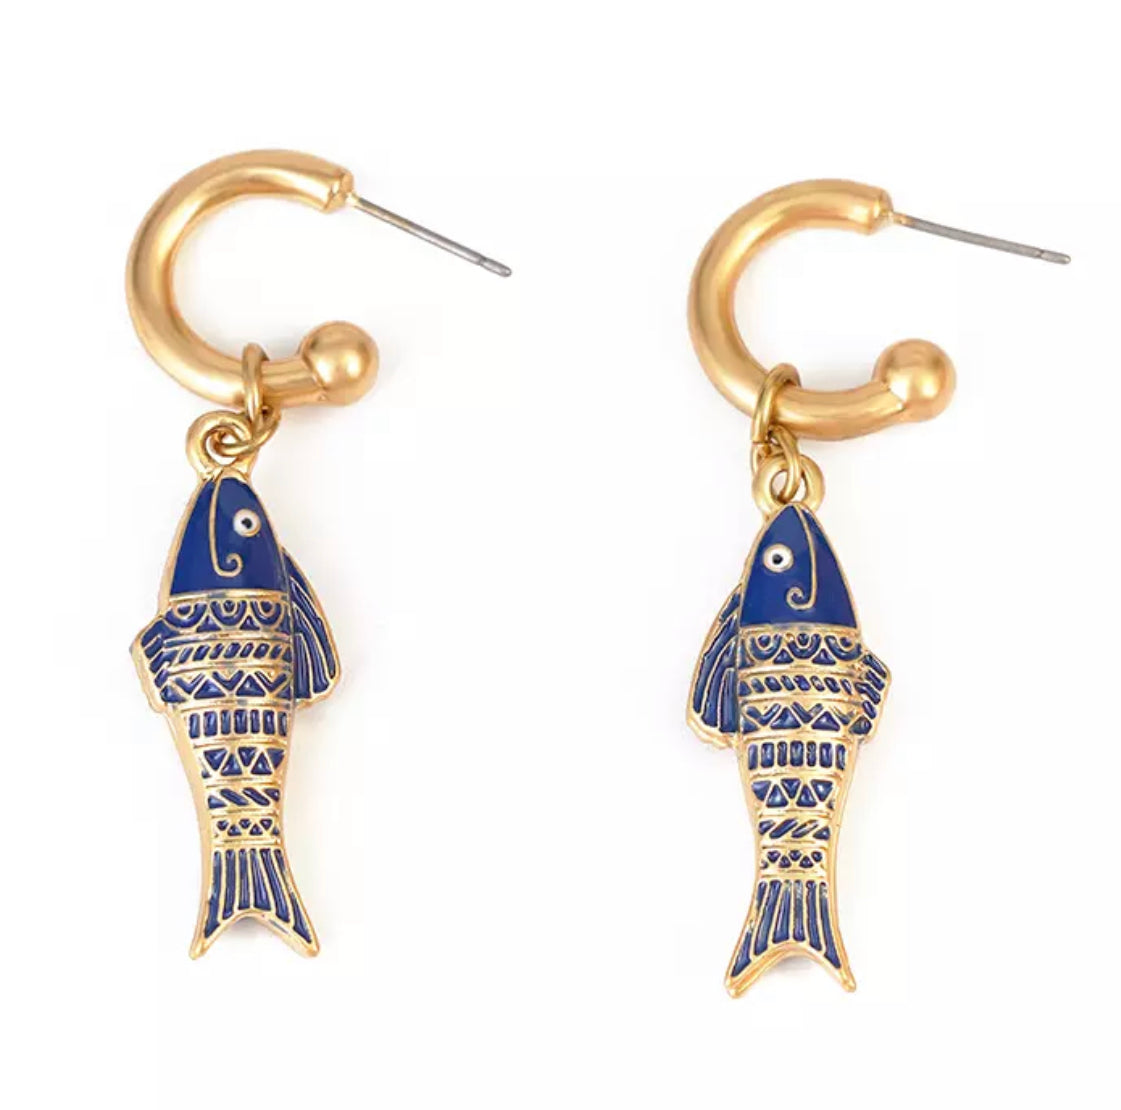 Catch of the day earring D